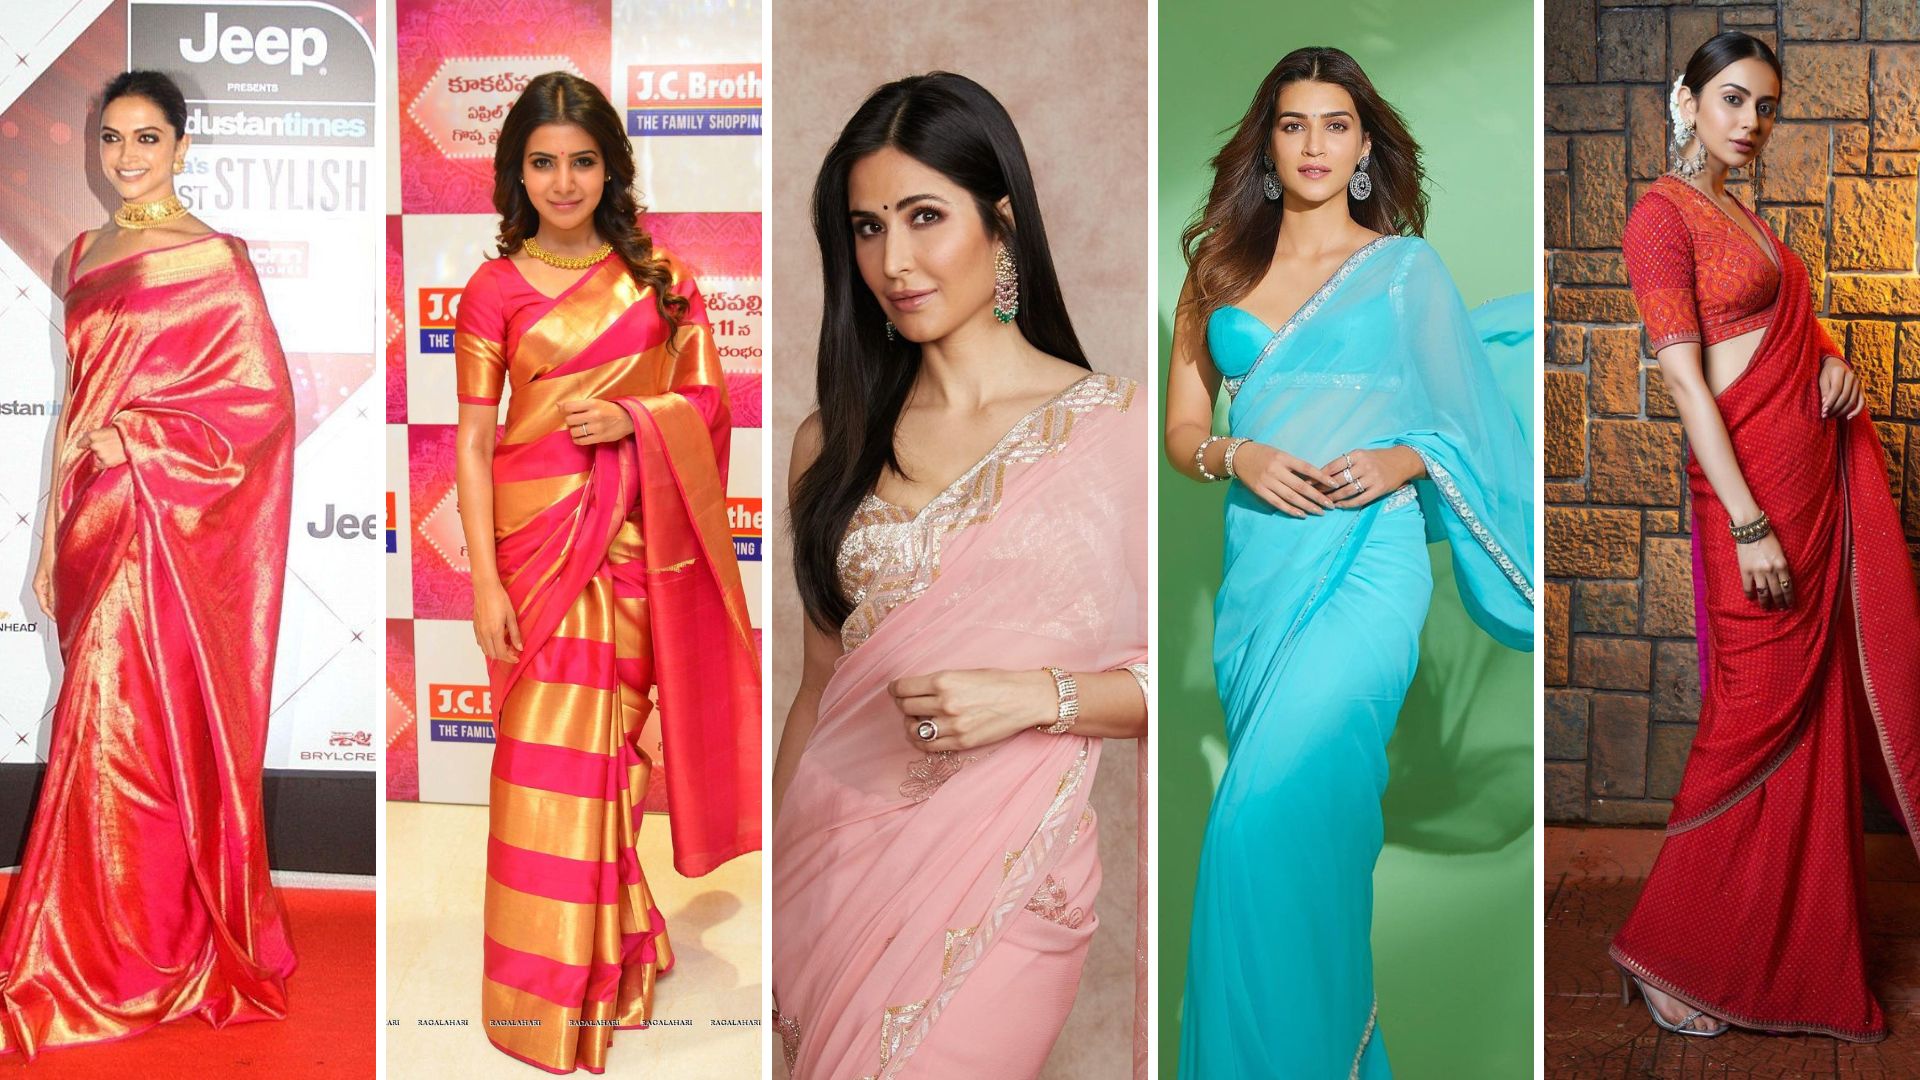 Top 5 Saree Styles for Weddings: A Guide to Elevating Your Bridal Look. Elevate your bridal look with our expert guide on the top 5 saree styles for weddings. Discover the best saree styles for your big day.